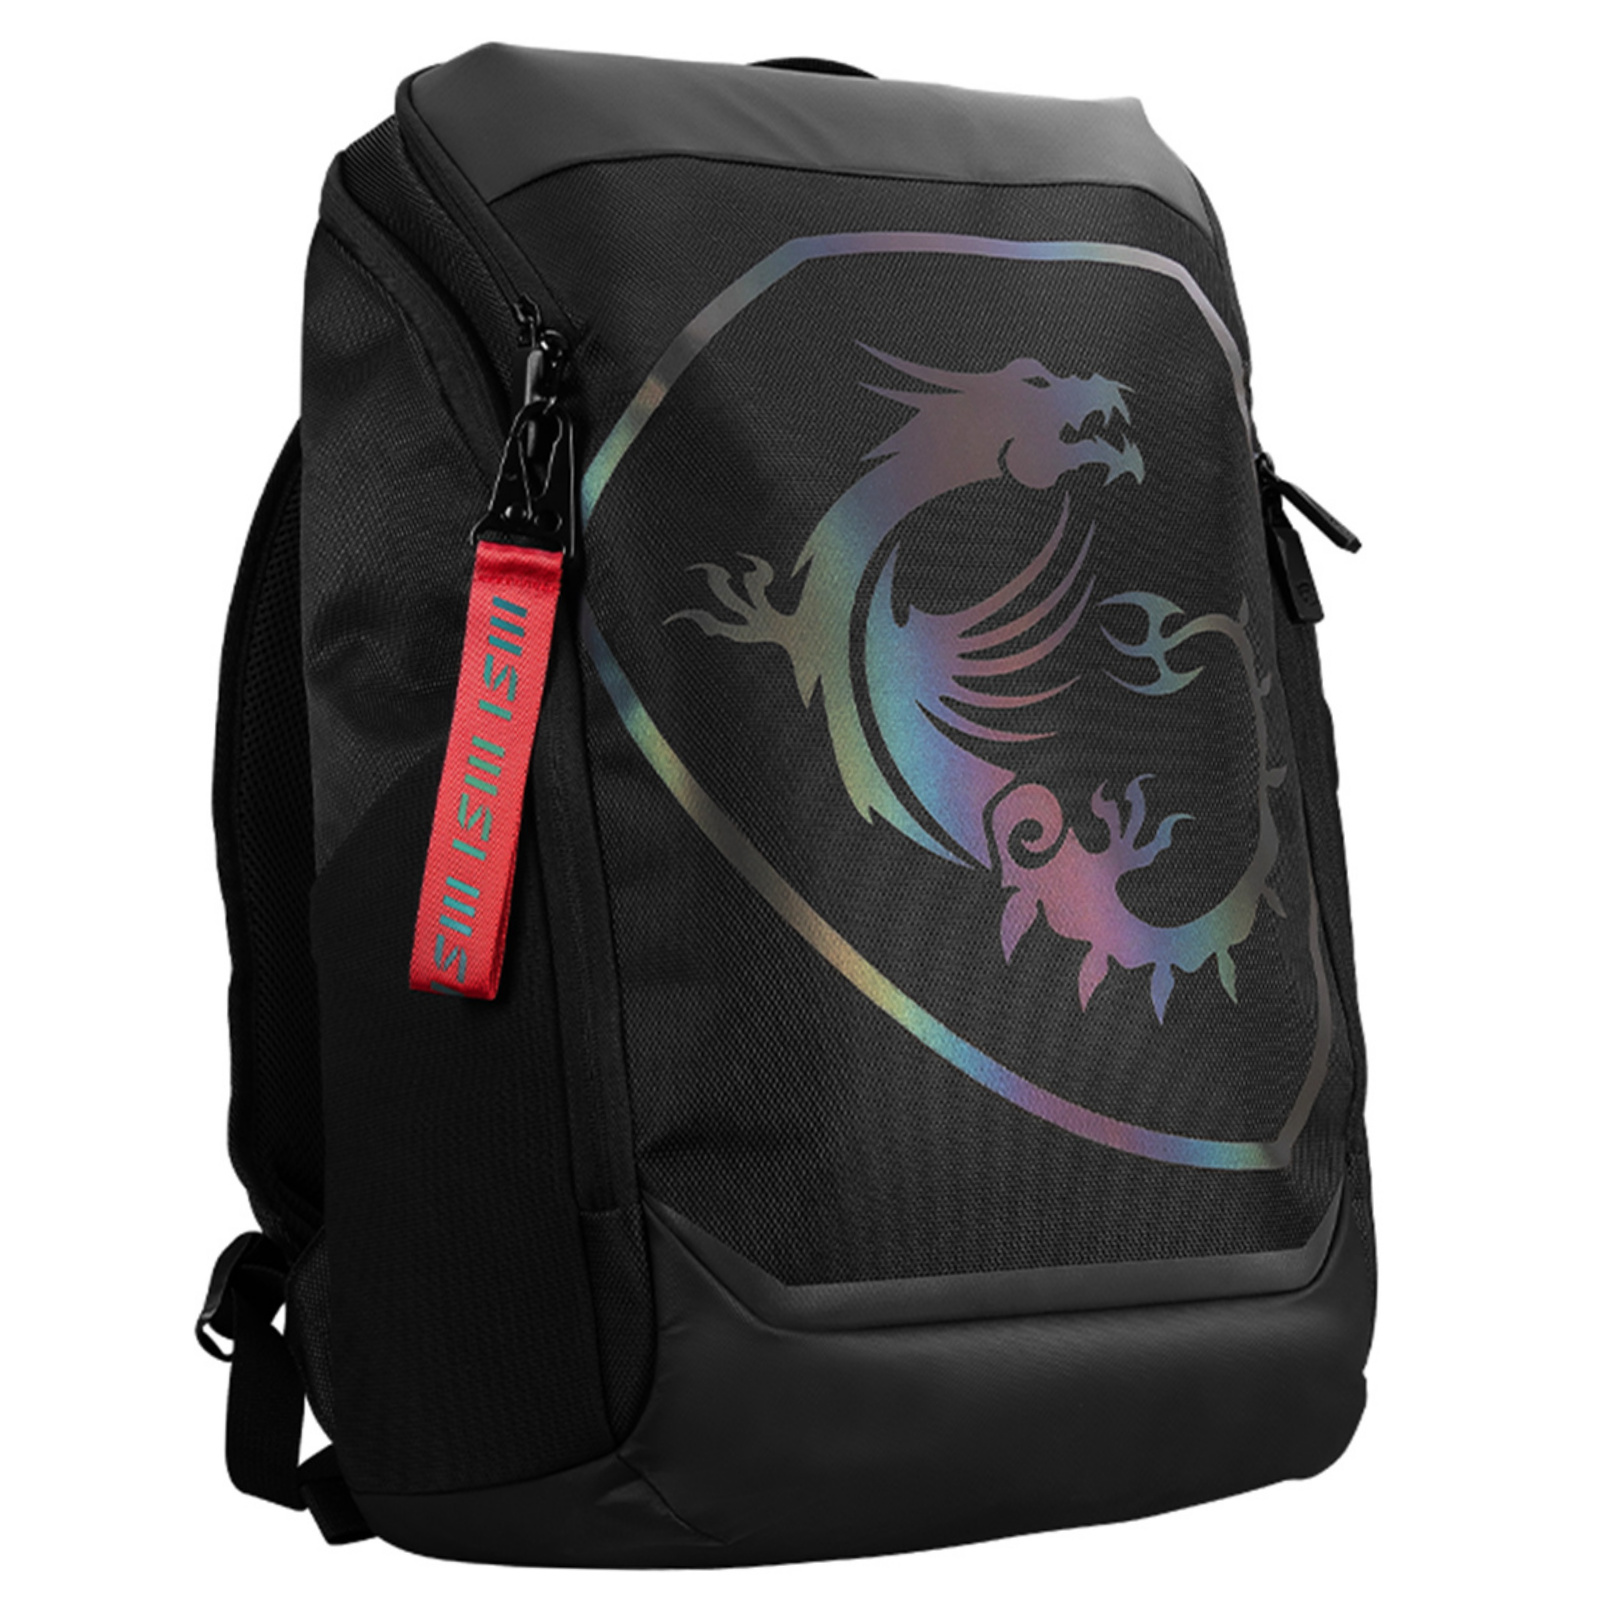 Picture of MSI Titan Gaming Backpack For 15.6"-17.3" Laptop